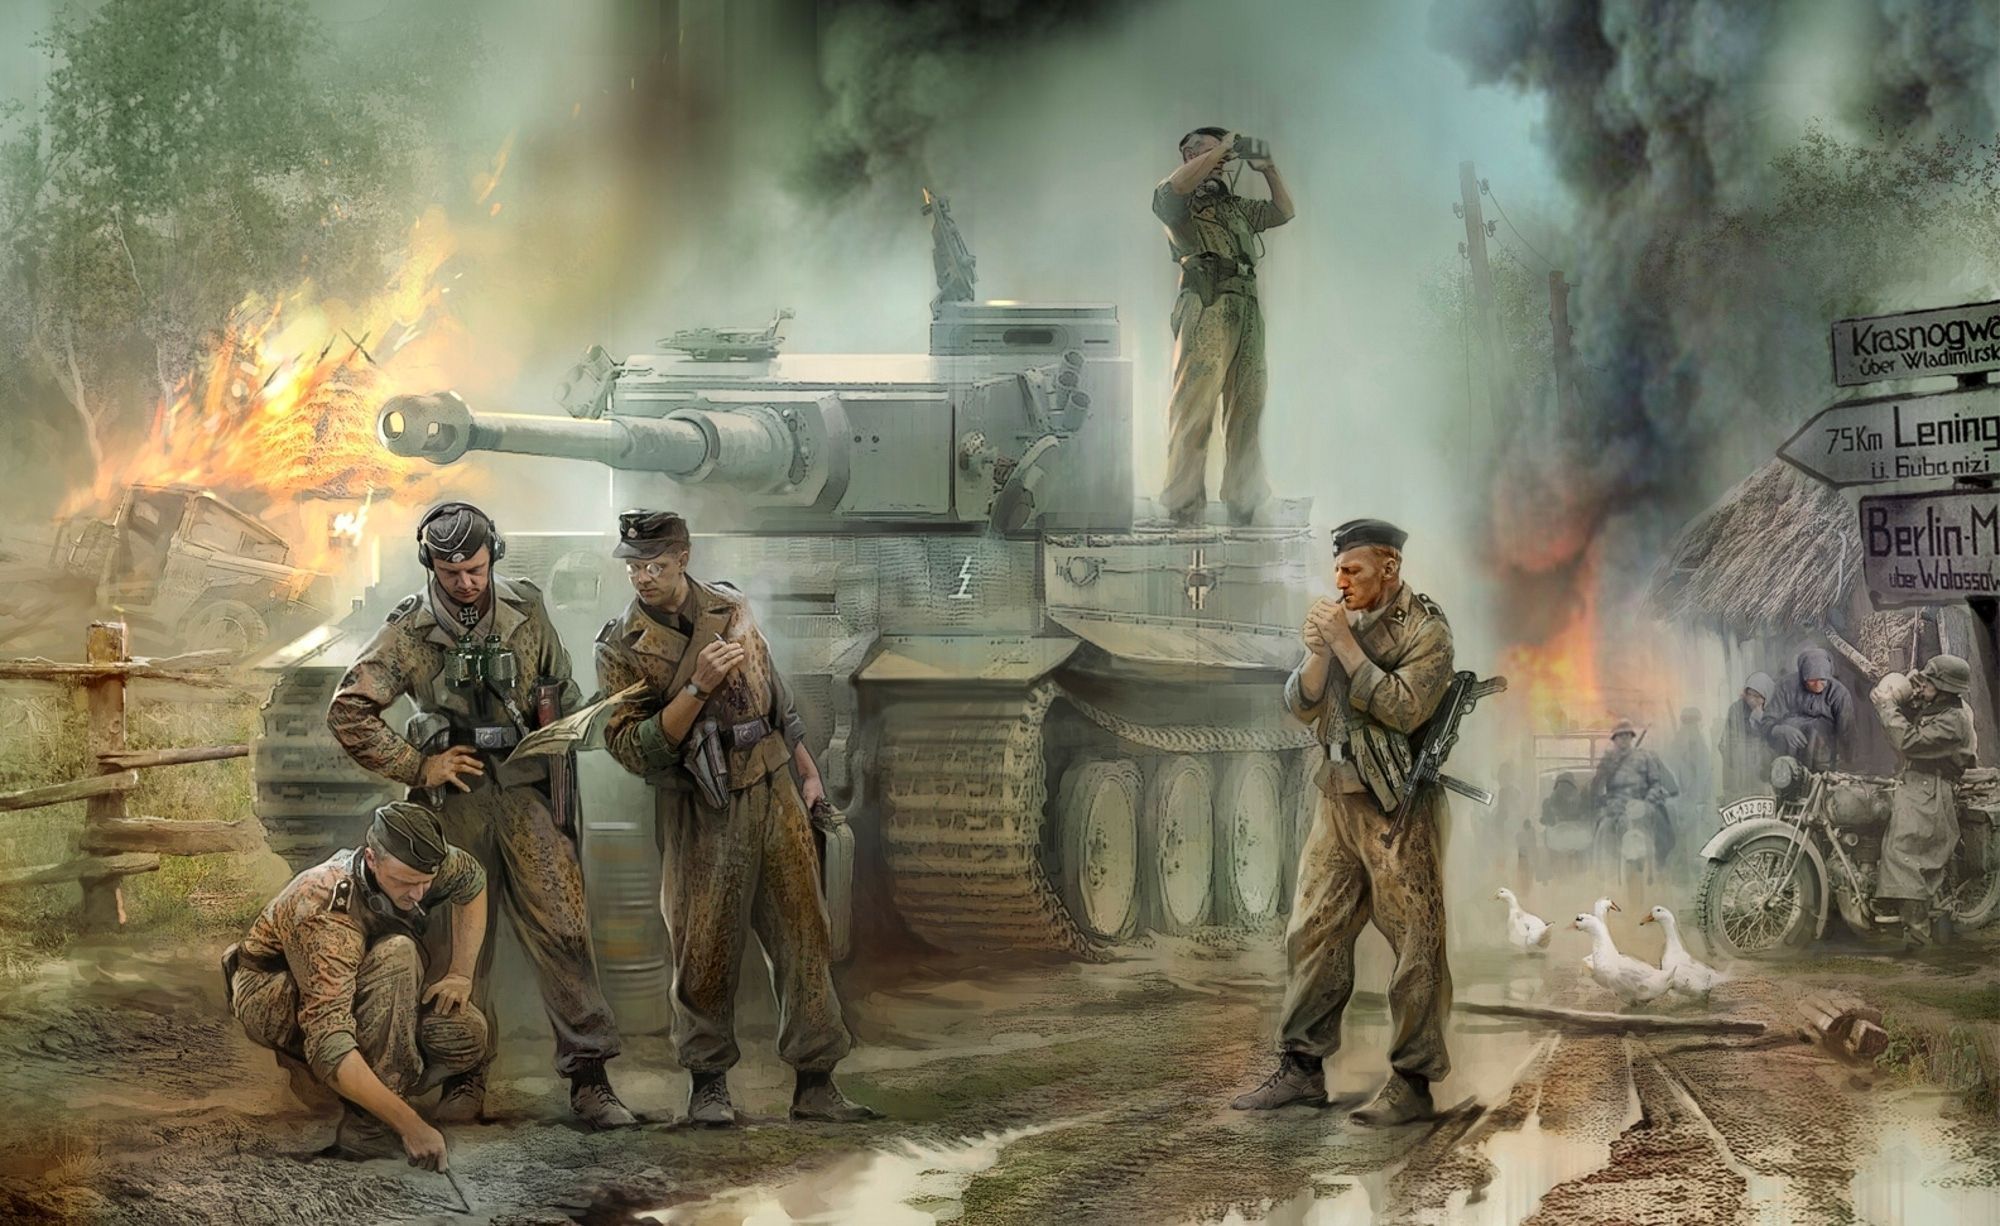 Wallpapers Tanks Soldiers Tiger Army Image Download